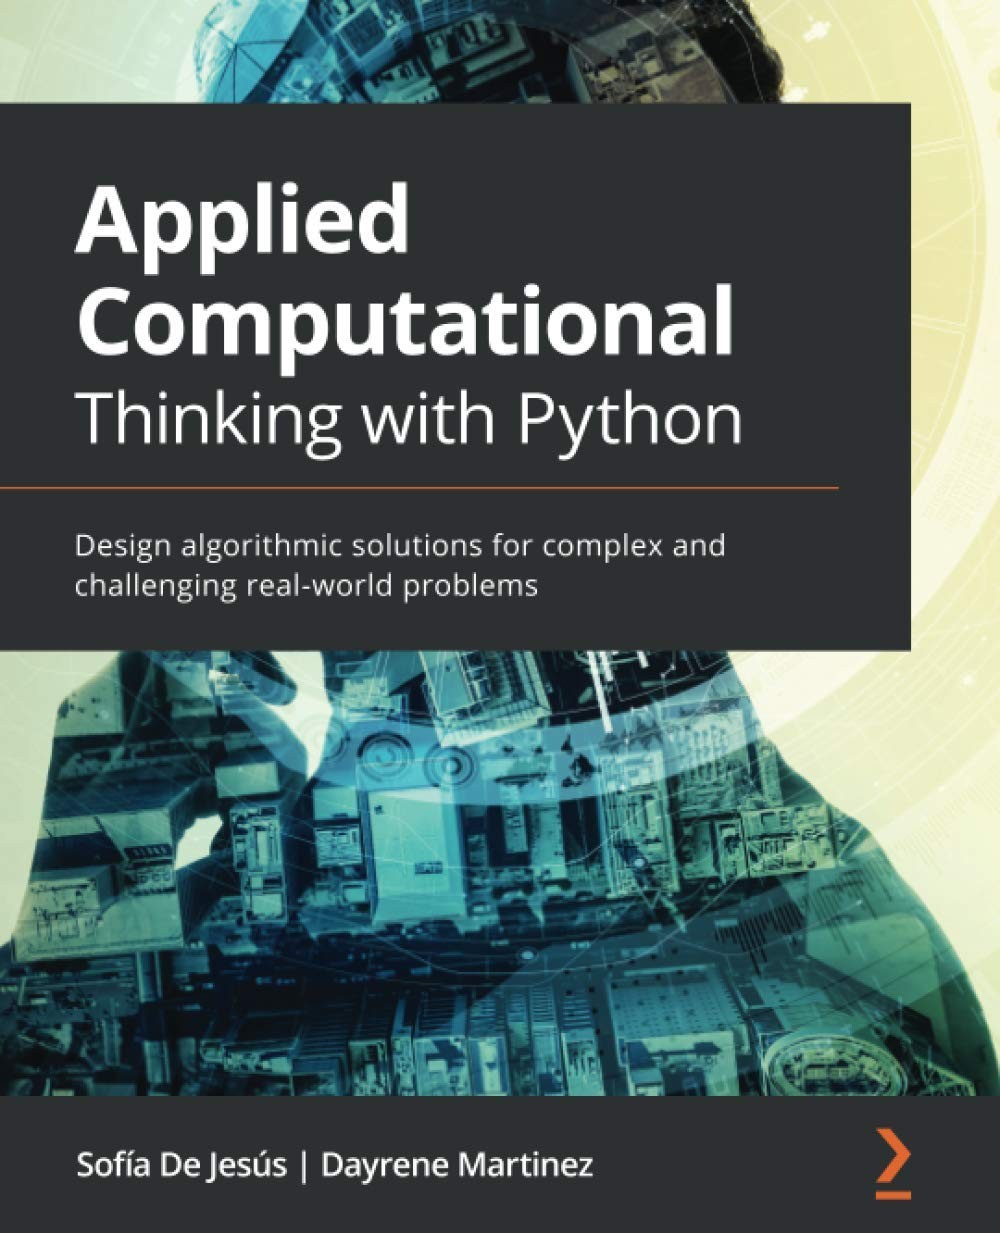 Applied Computational Thinking With Python: Design Algorithmic Solutions for Complex and Challenging Real-World Problems